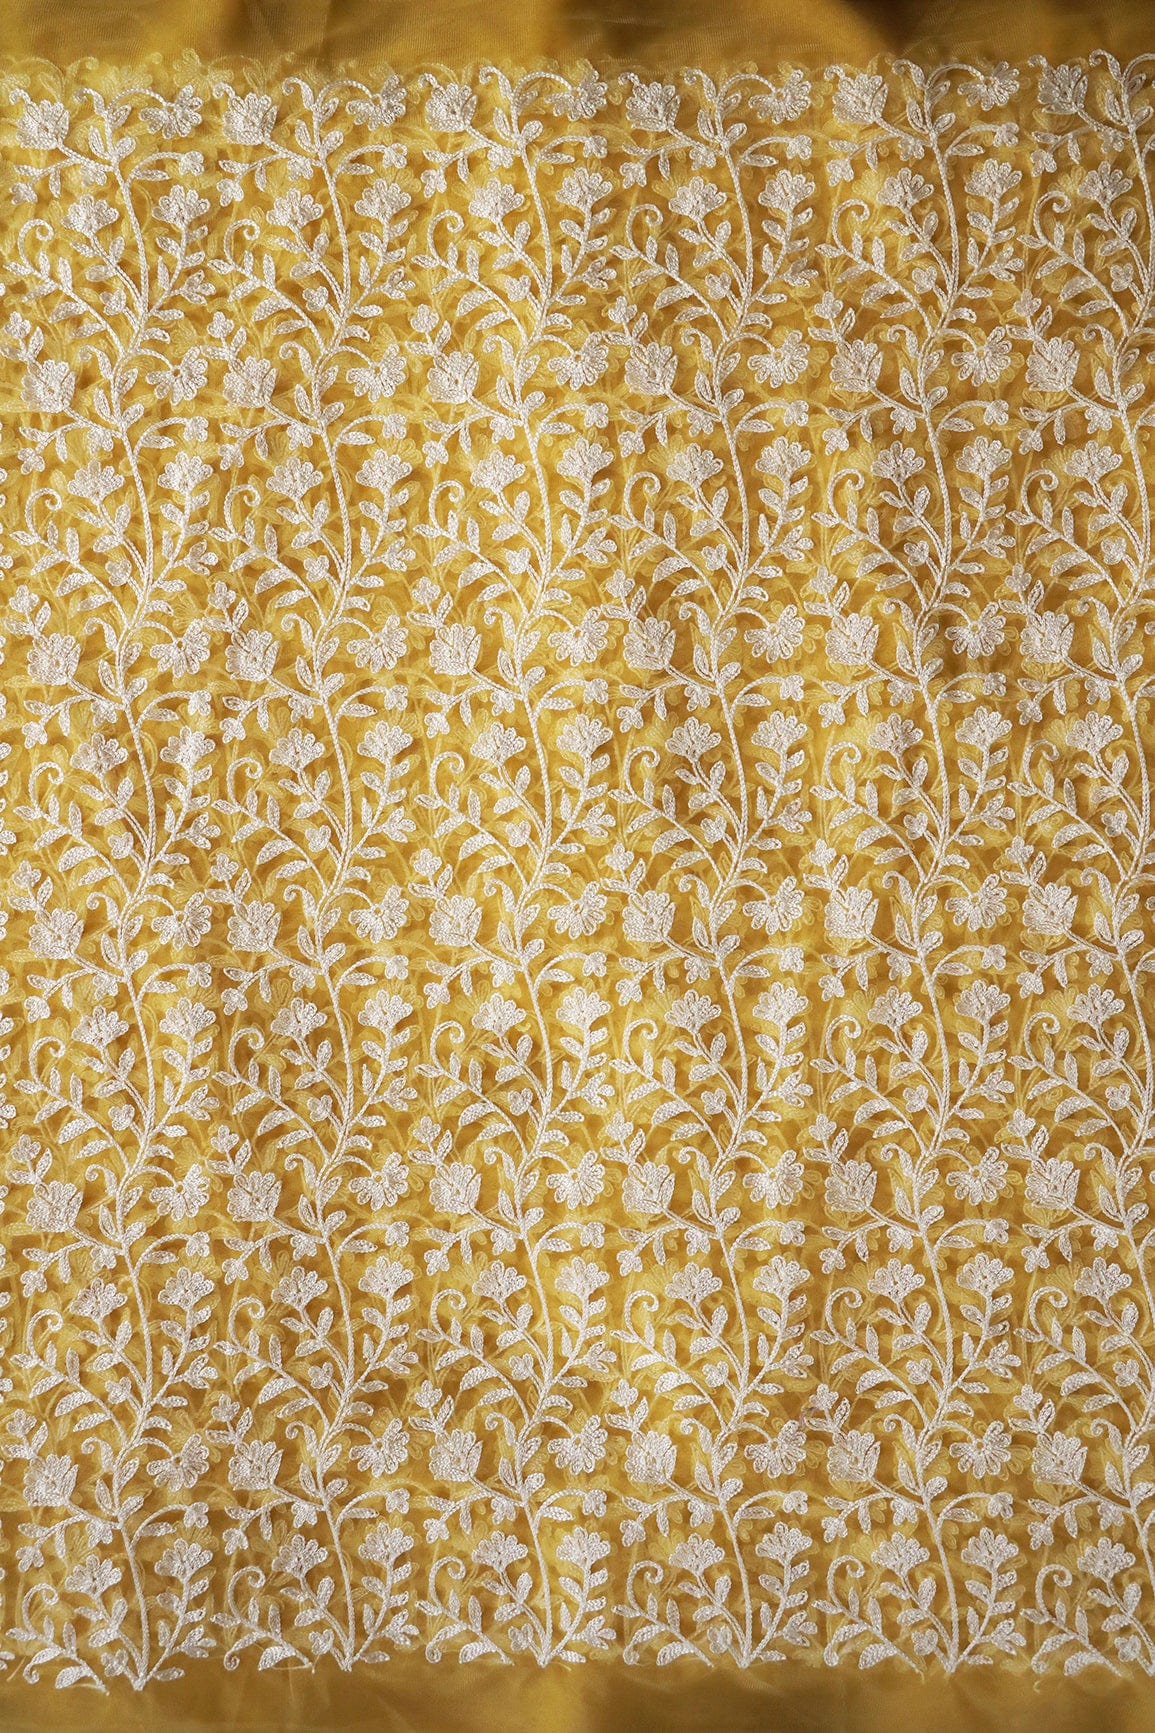 doeraa Embroidery Fabrics Beautiful White Thread Floral Embroidery On Yellow Soft Net Fabric